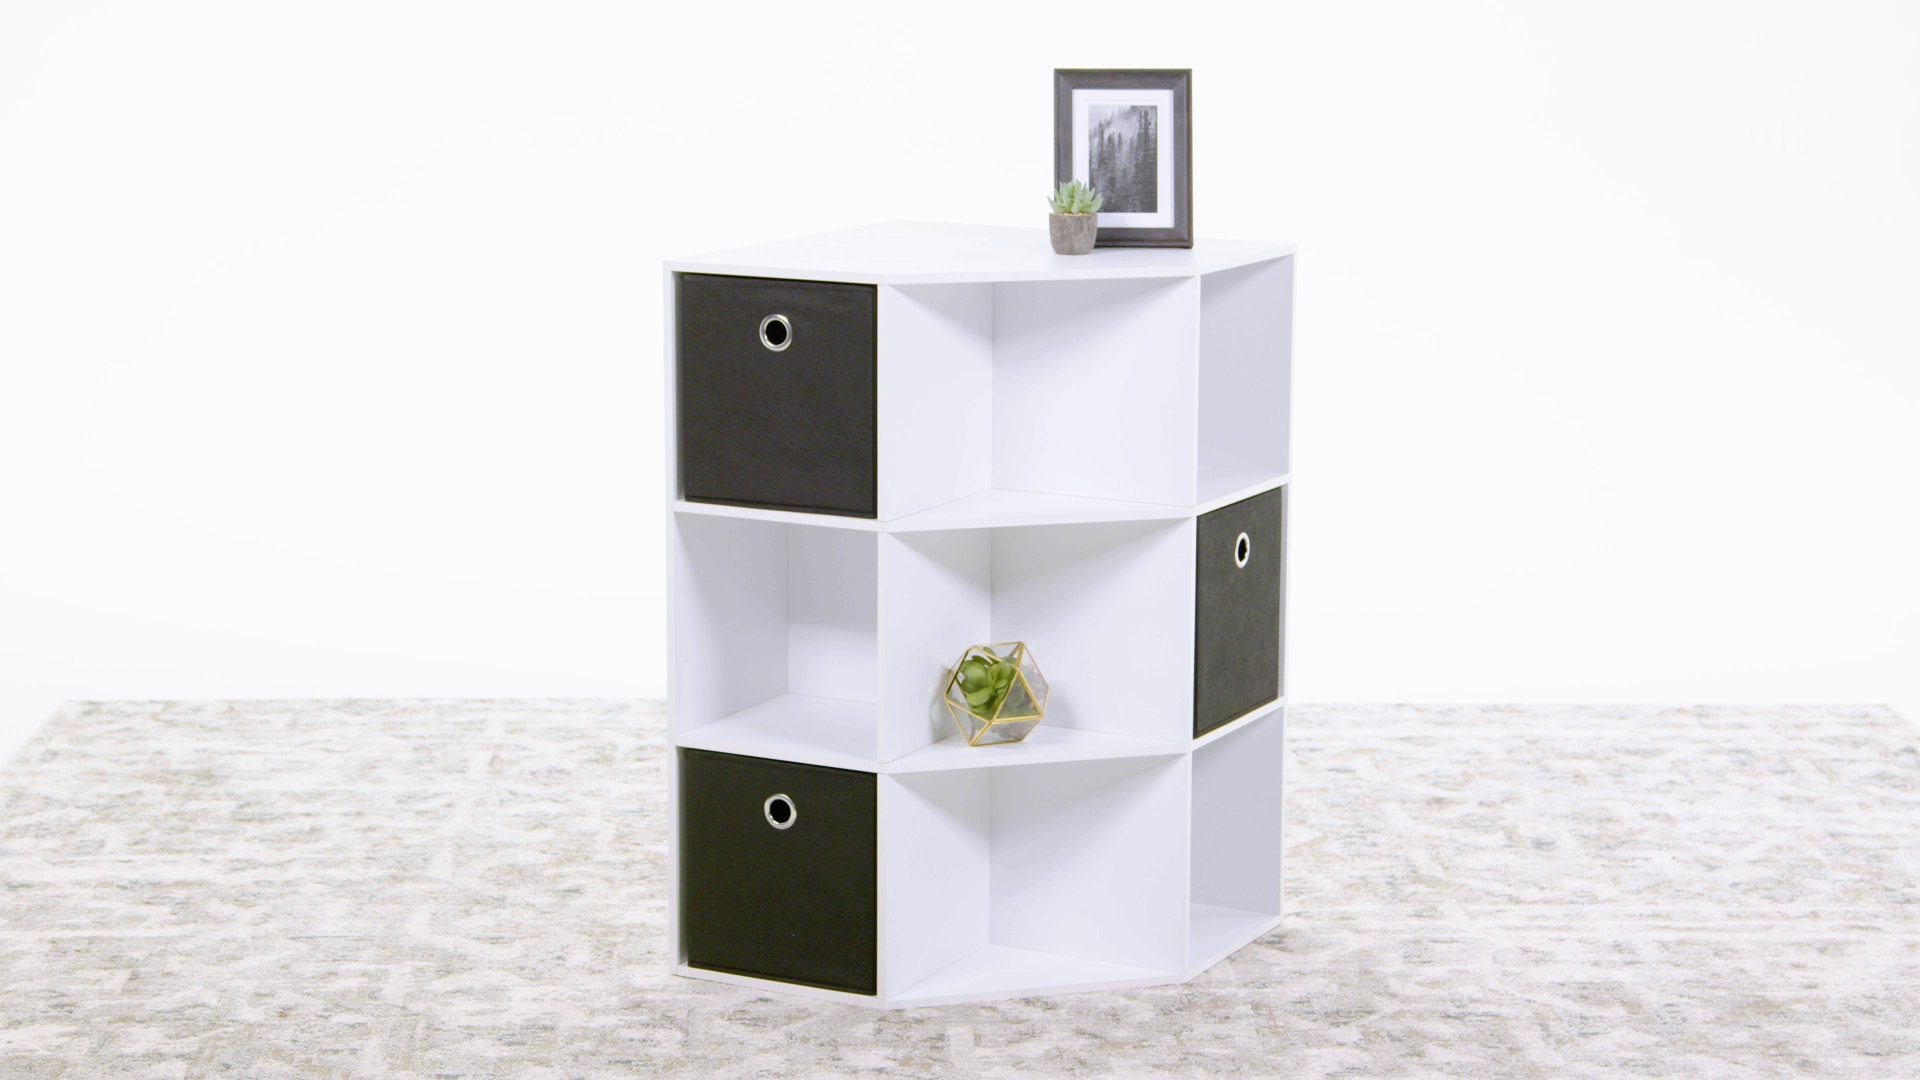 Style Selections Style Selections White 9 Cube Corner and Black Fabric  Collapsible Bin Organizer Collection